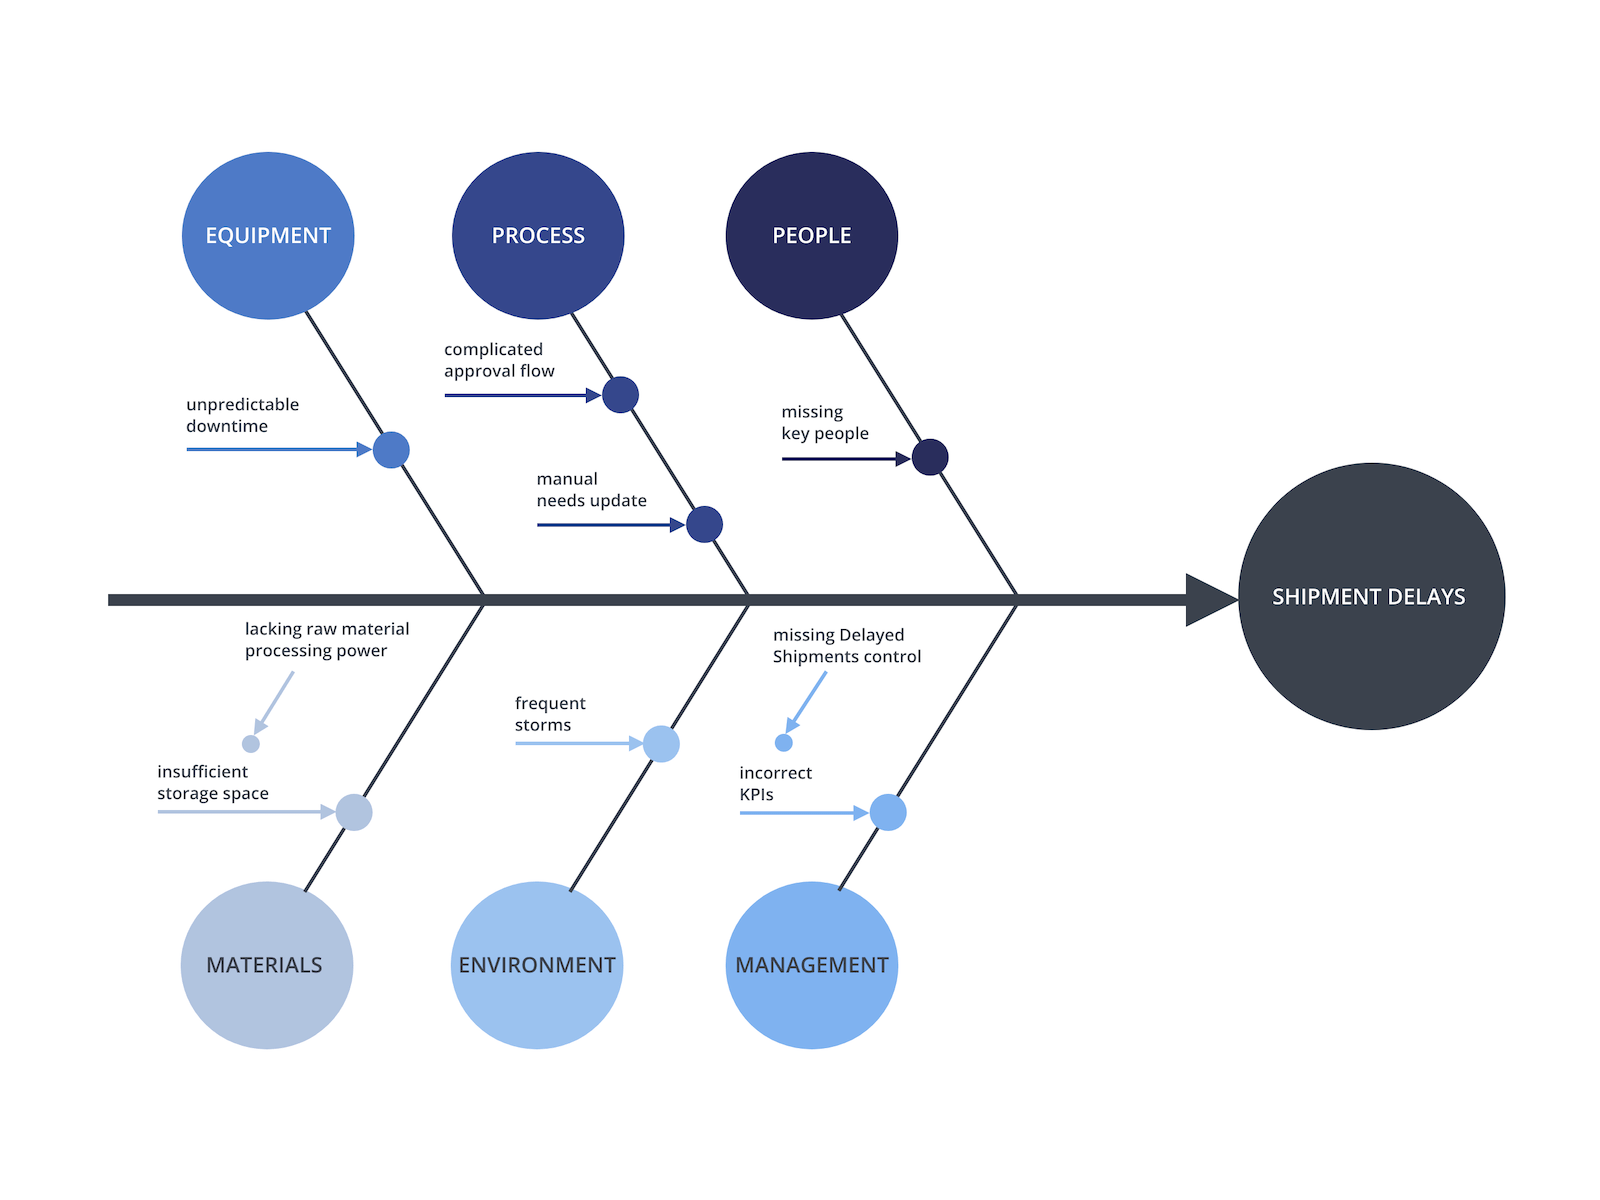 Cause and Effect Diagram Template